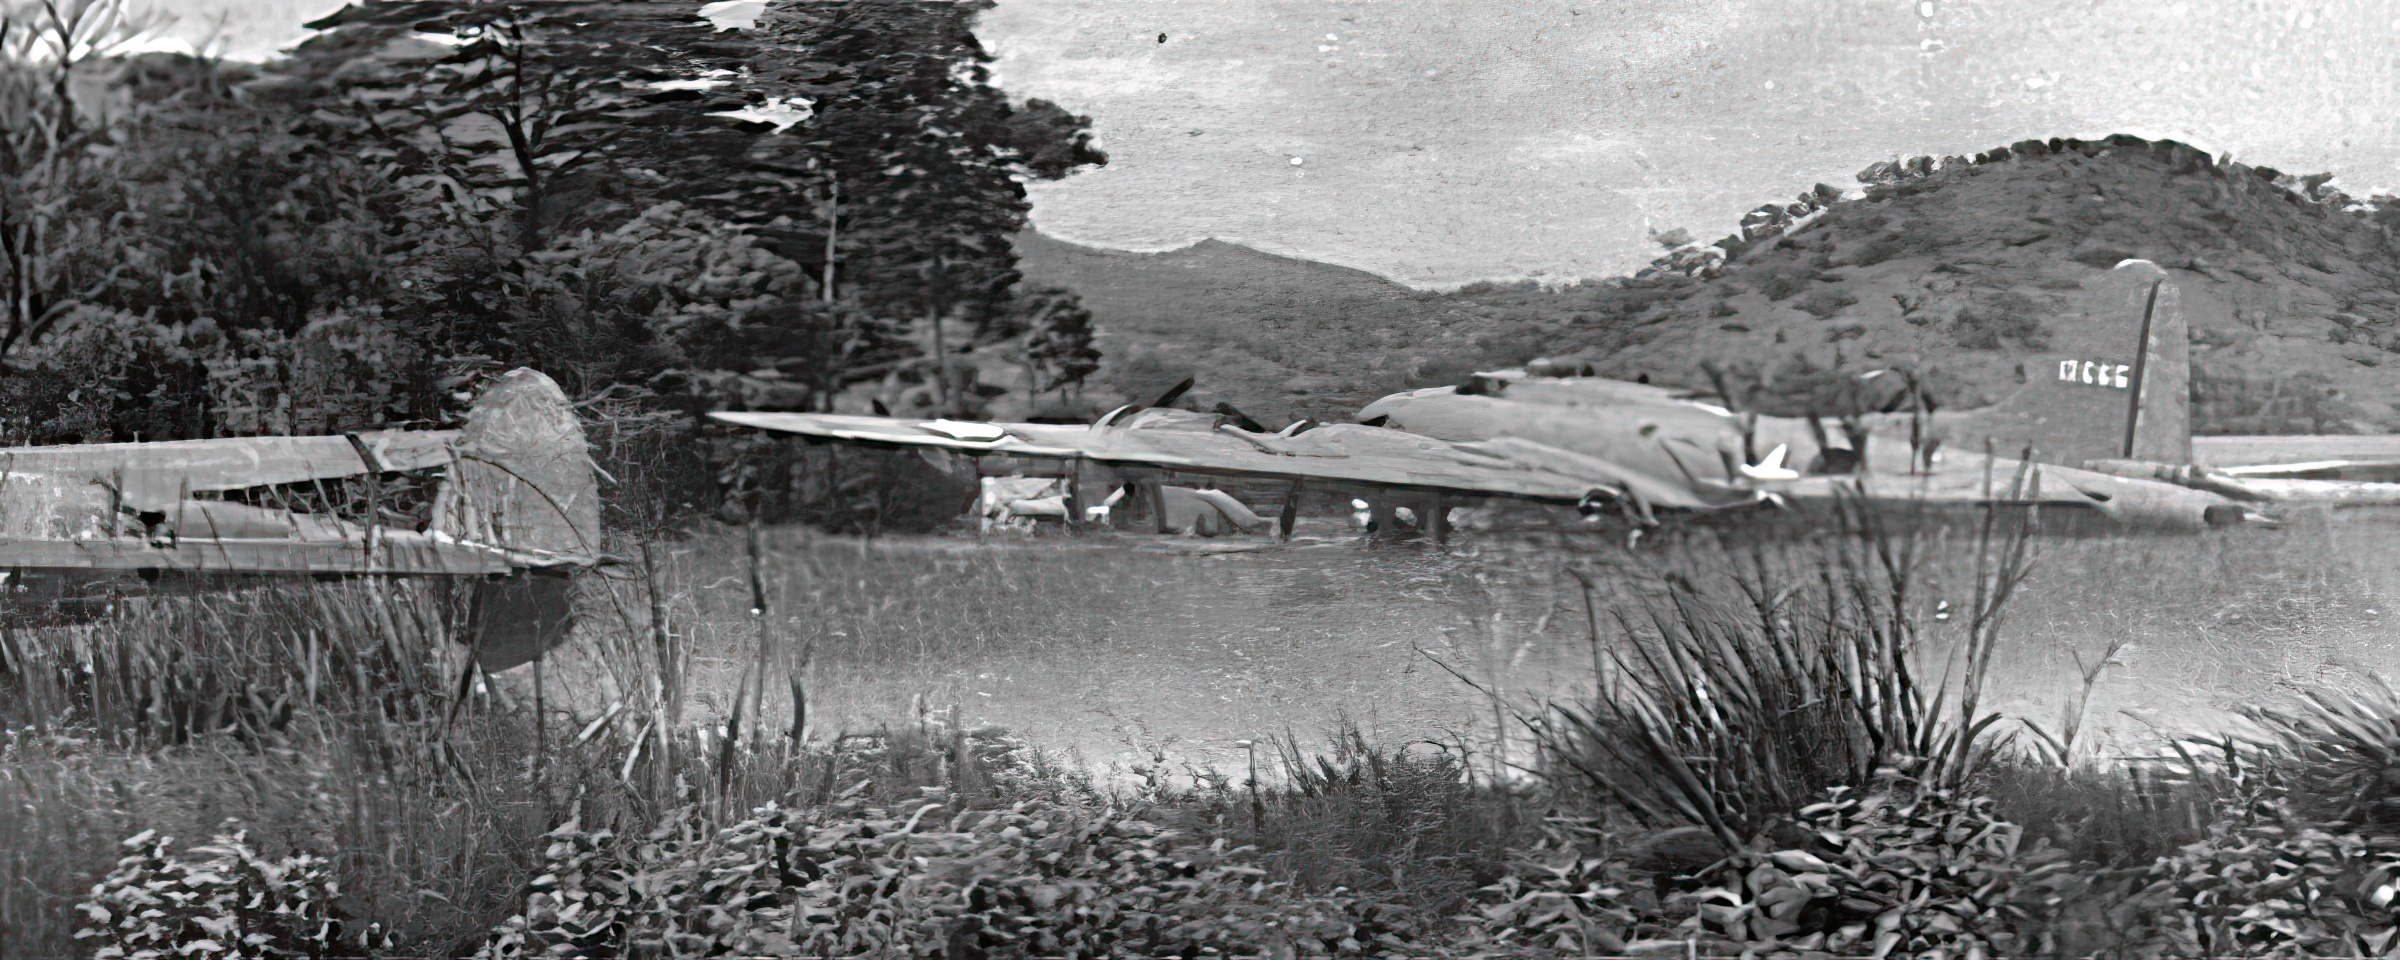 Only known photo of bomber 666. B-17E bomber, "Lucy" 41-2666 parked at parked at 14-Mile Drome (Schwimmer) near Port Moresby, New Guinea. The image appears in the last few seconds of a military film from the 8th Photo Reconnaissance Squadron